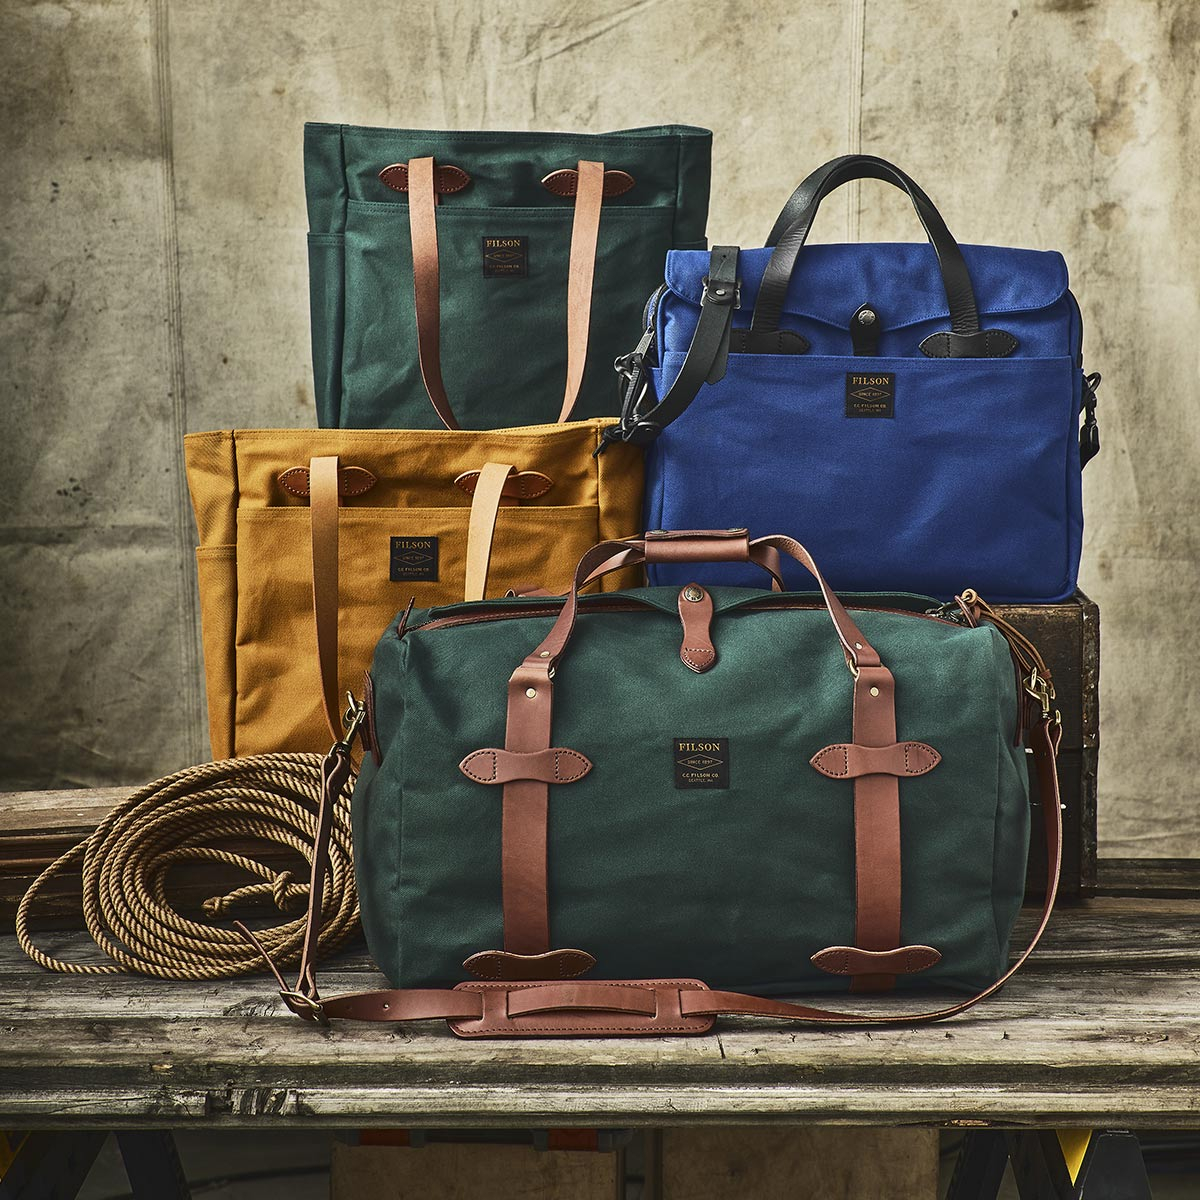 Filson Rugged Twill Tote Bag With Zipper Limited Colors, lifestyle